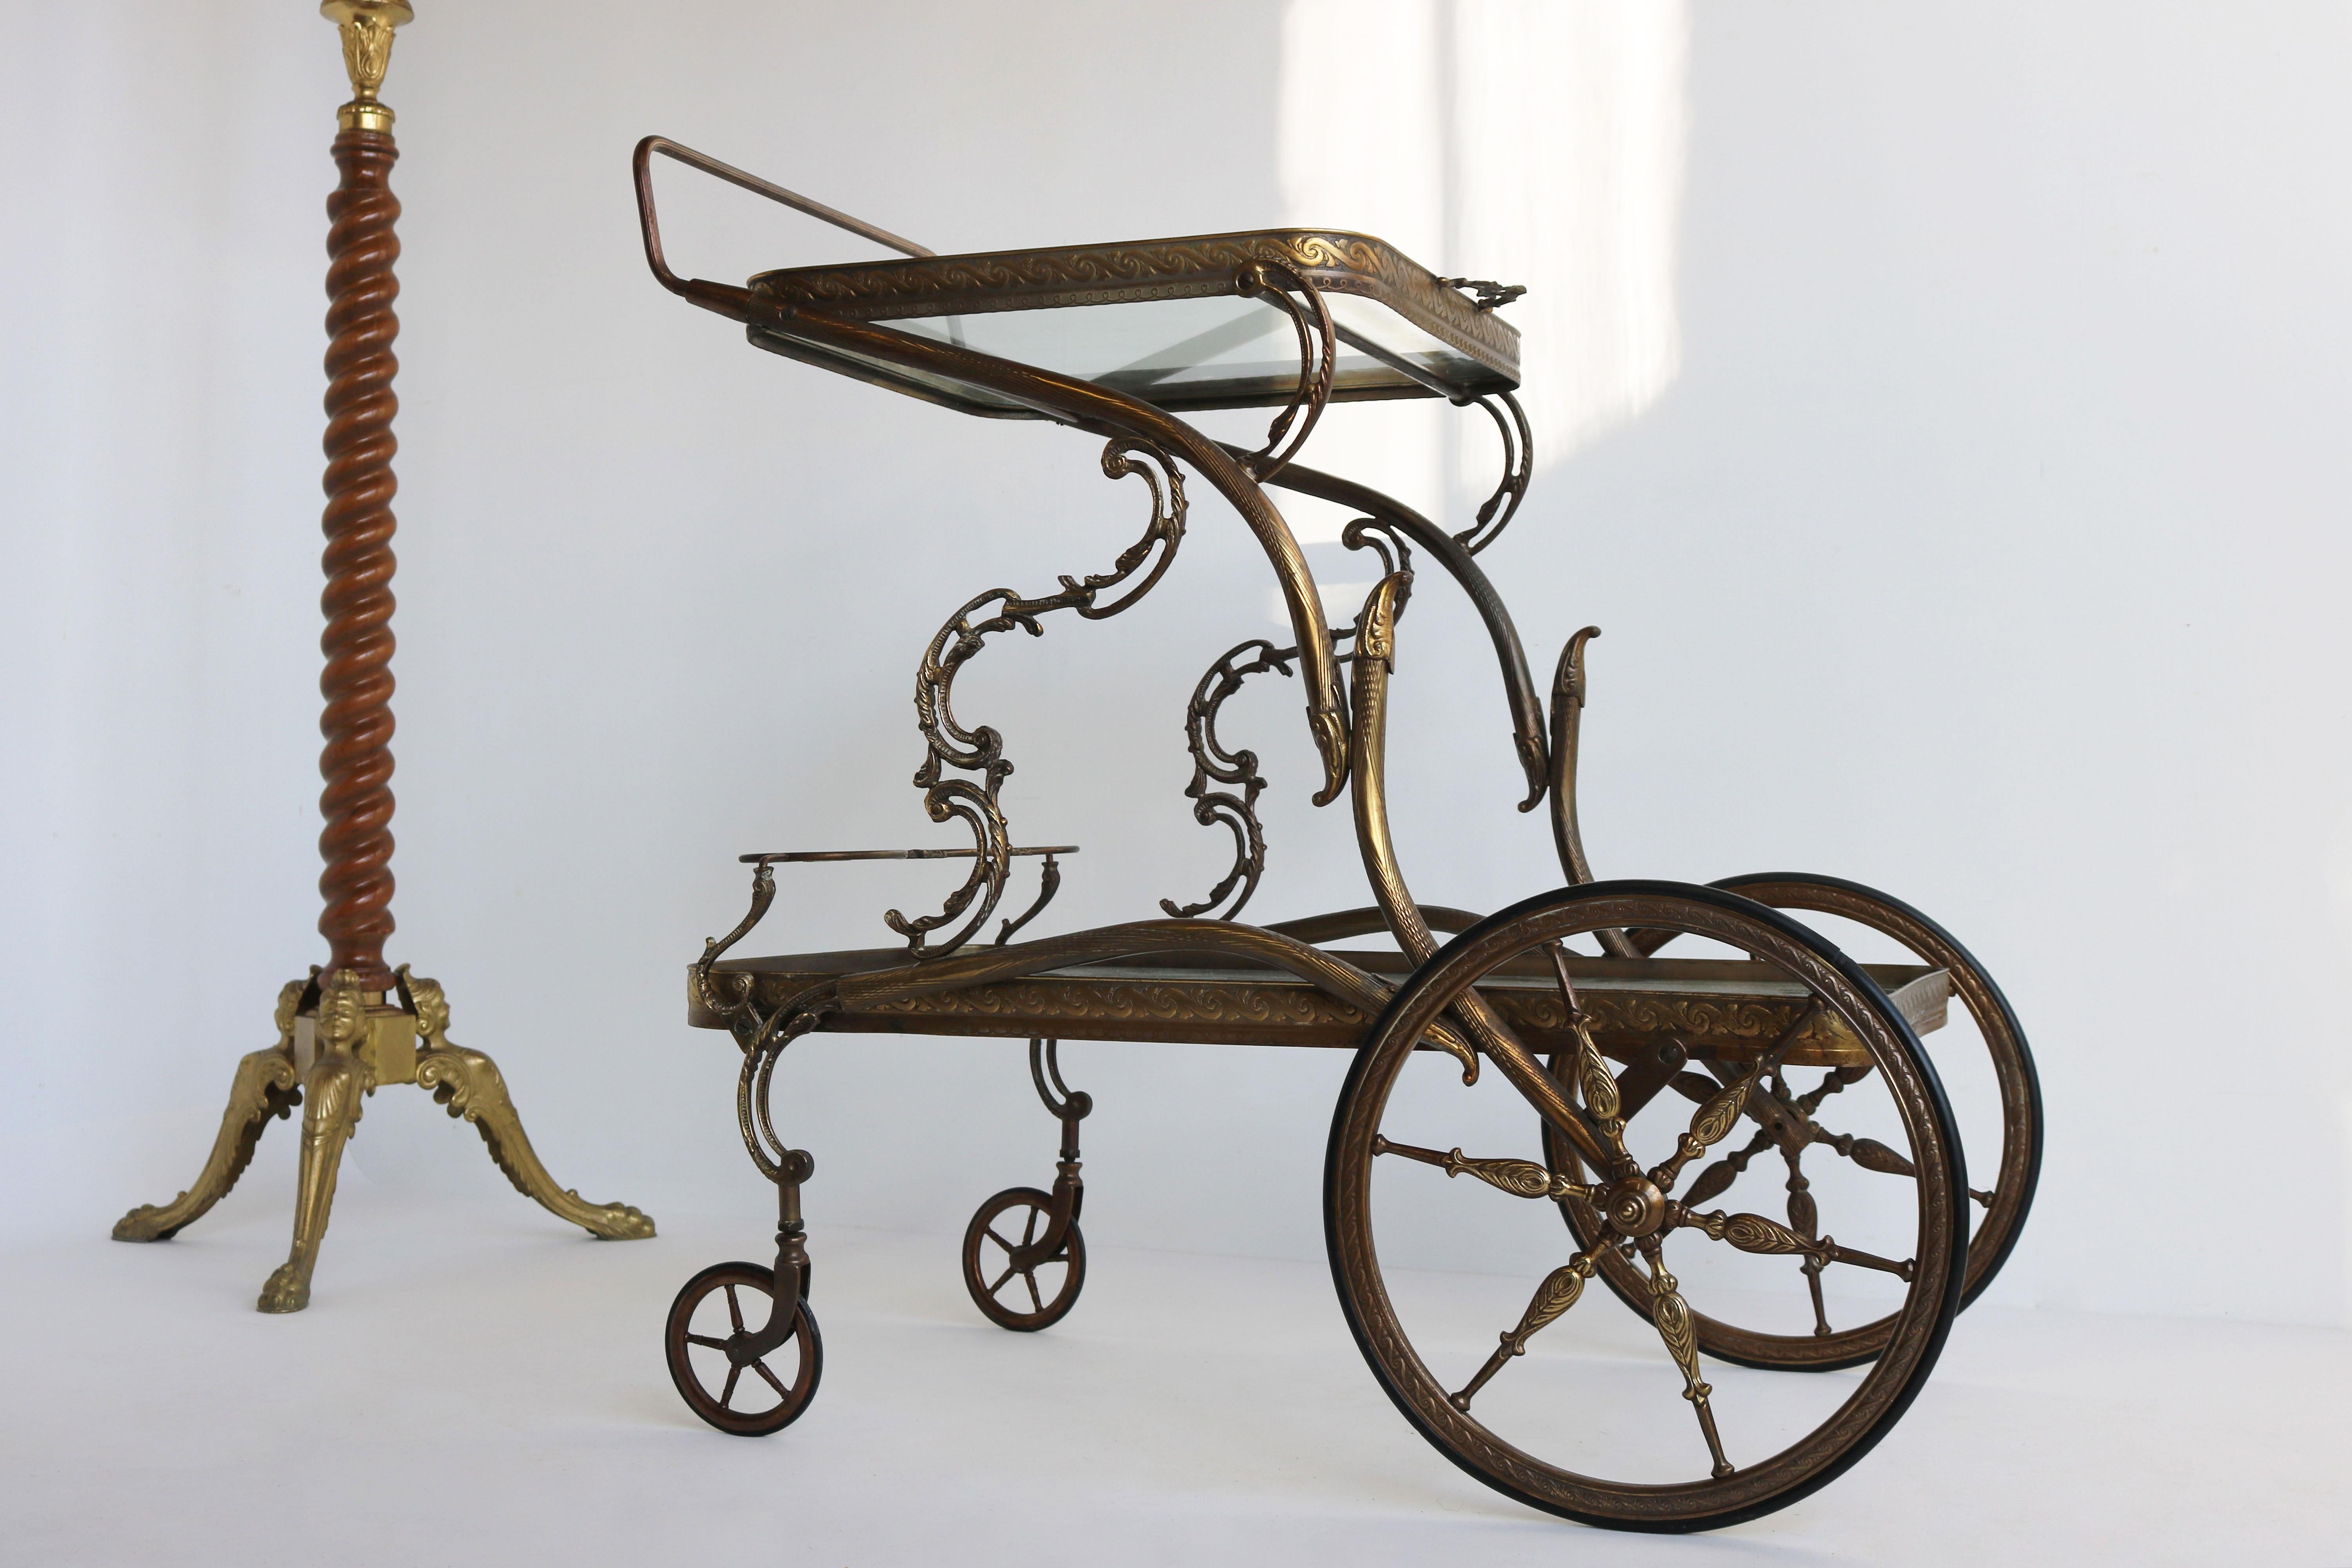 Exquisite Italian 1940s Hollywood Regency Bar Cart / Trolley Rococo Brass Glass For Sale 3